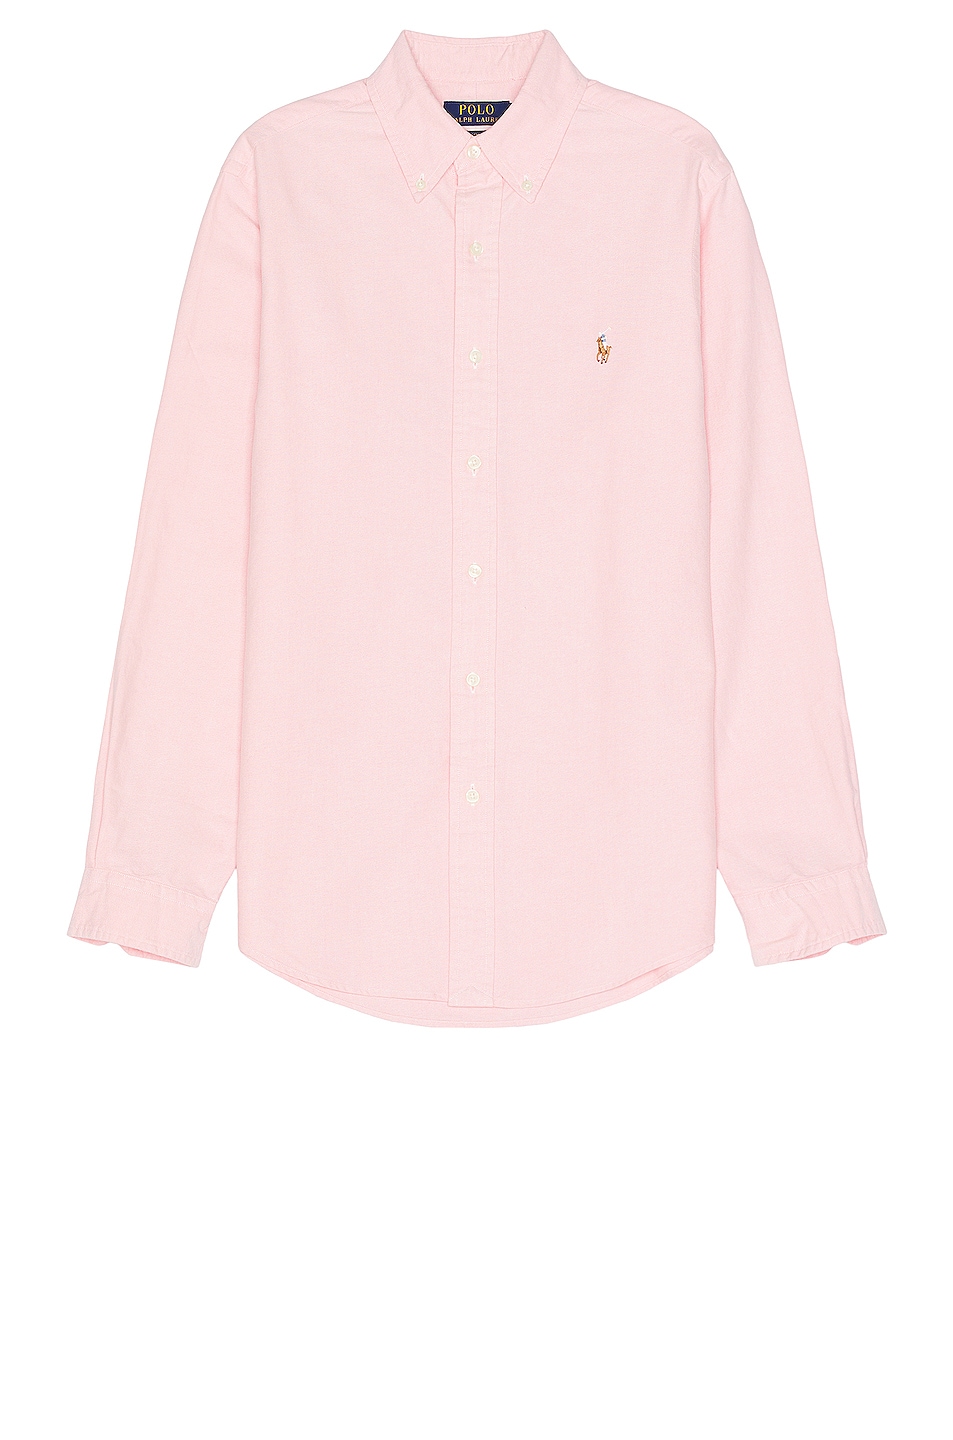 Image 1 of Polo Ralph Lauren Oxford Sport Shirt in Pink